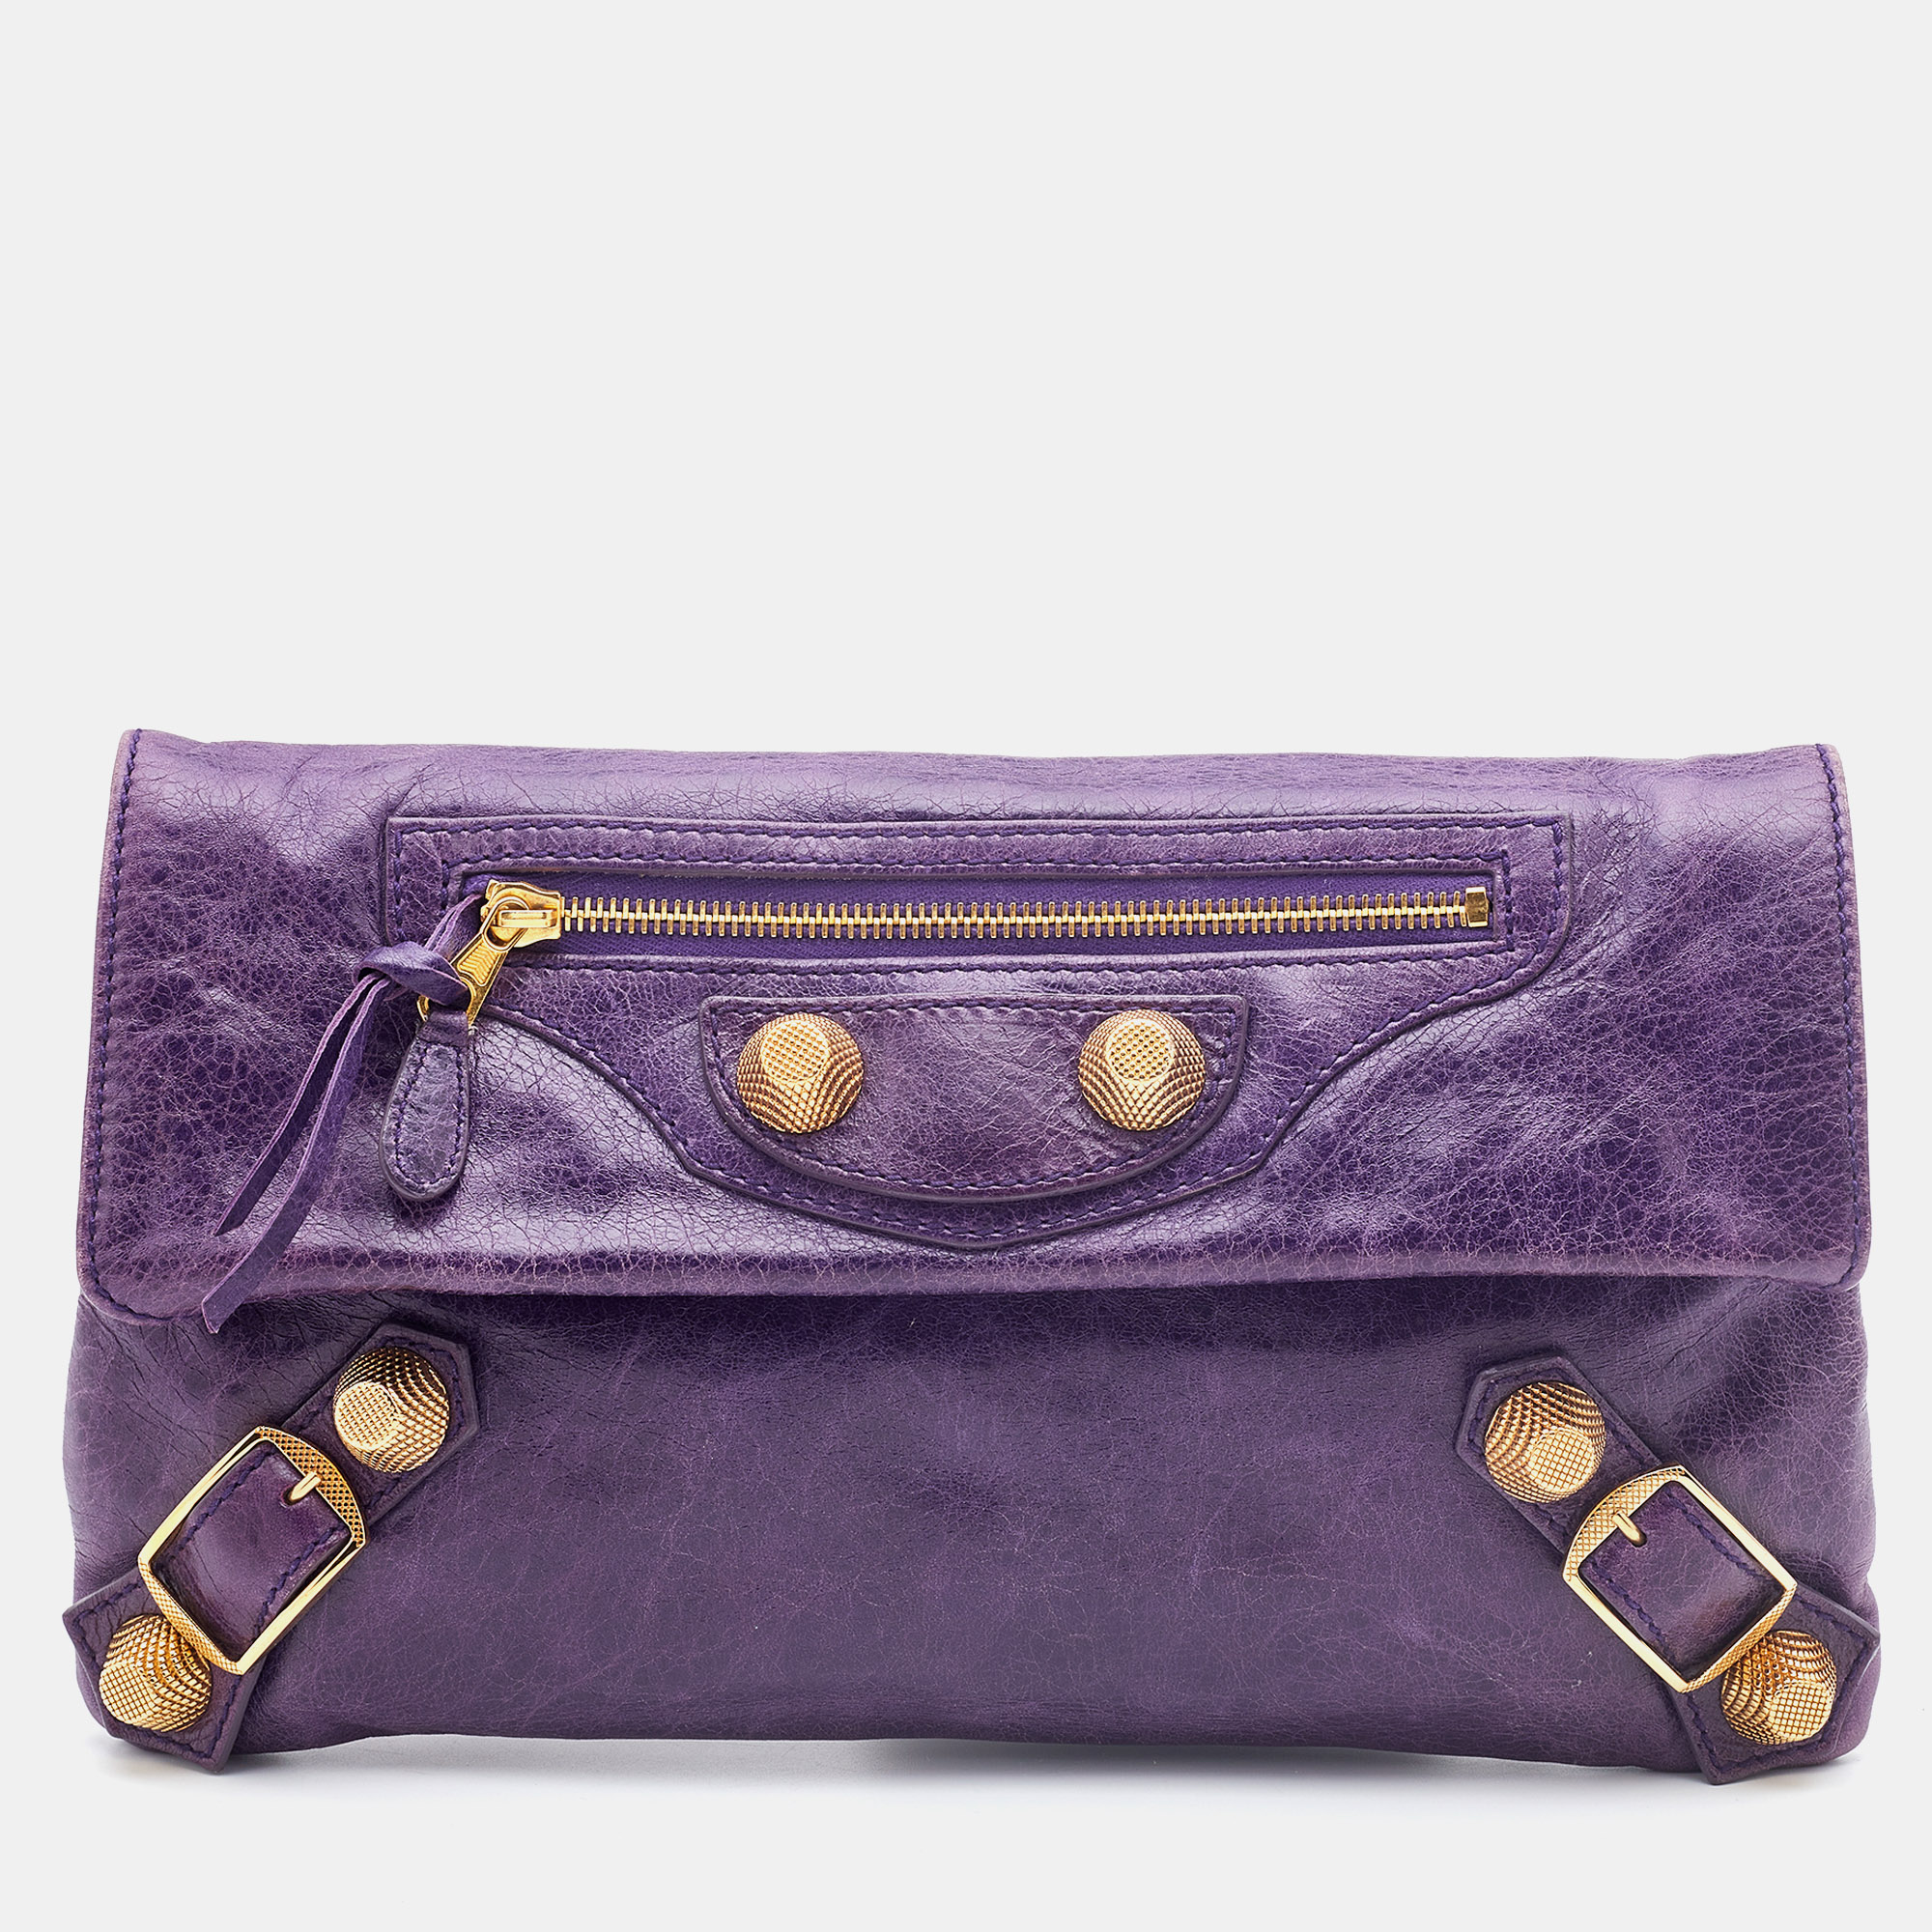 Pre-owned Balenciaga Purple Leather Giant 21 Envelope Clutch